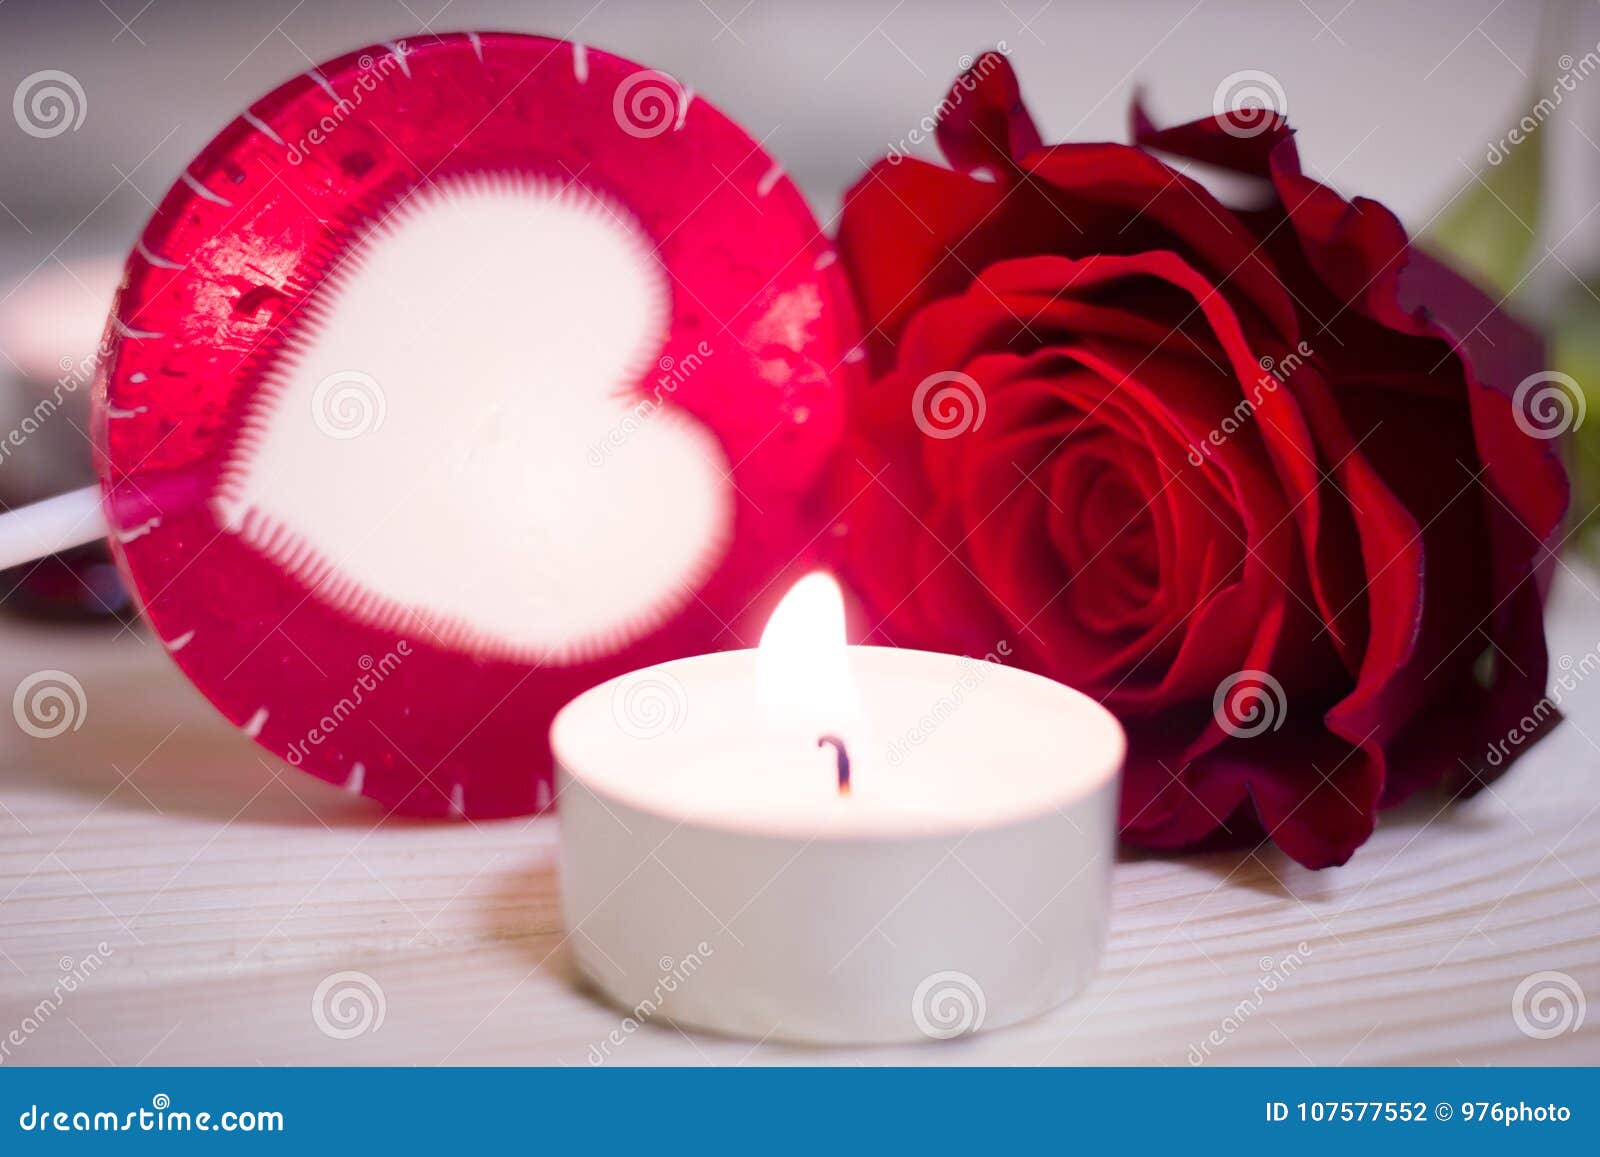 The Concept of St.Valentine S Day with a Red Rose and Candle Stock ...